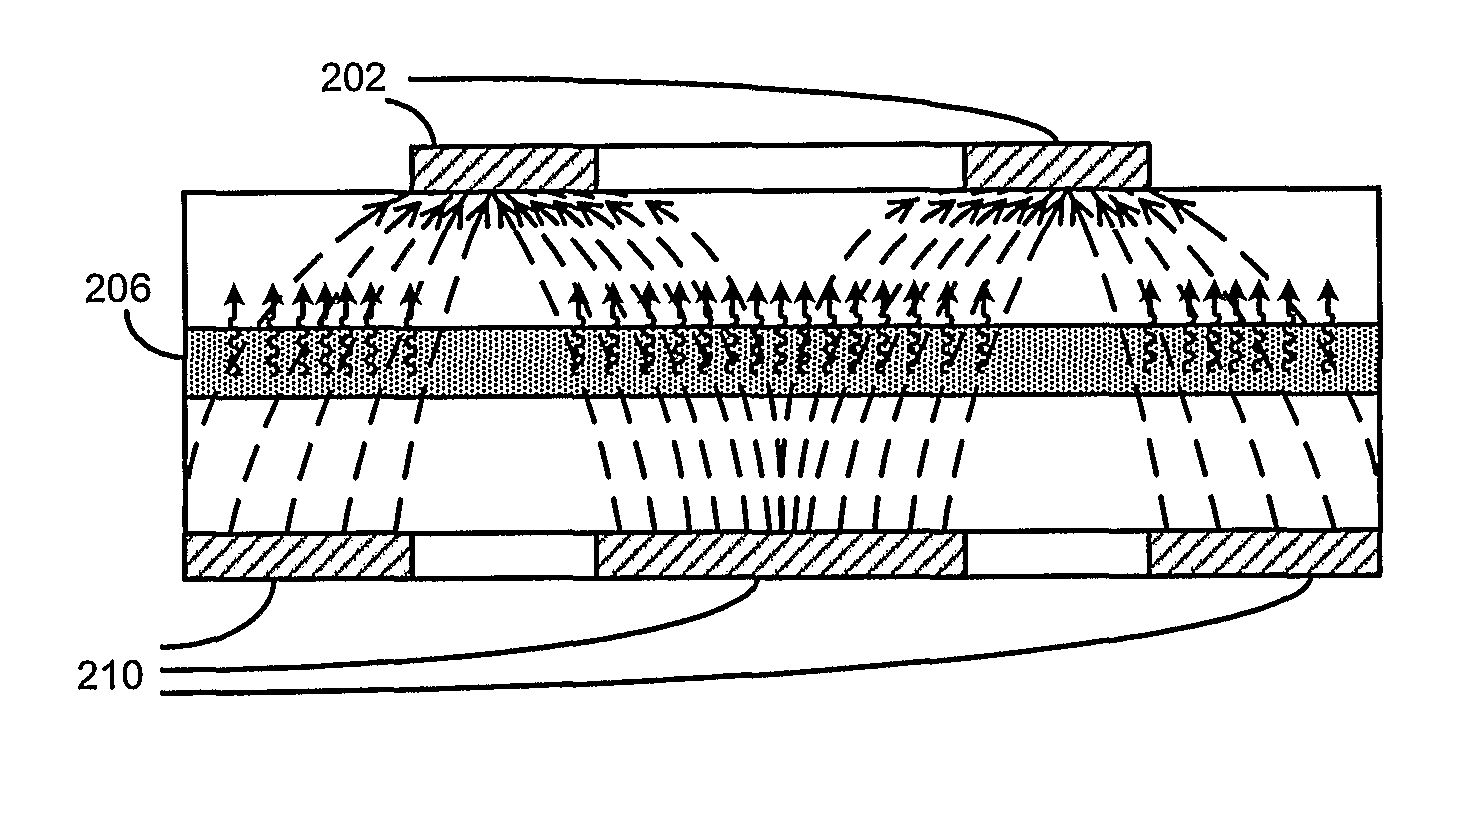 Semiconductor Light-Emitting Device with Electrode for N-Polar Ingaain Surface